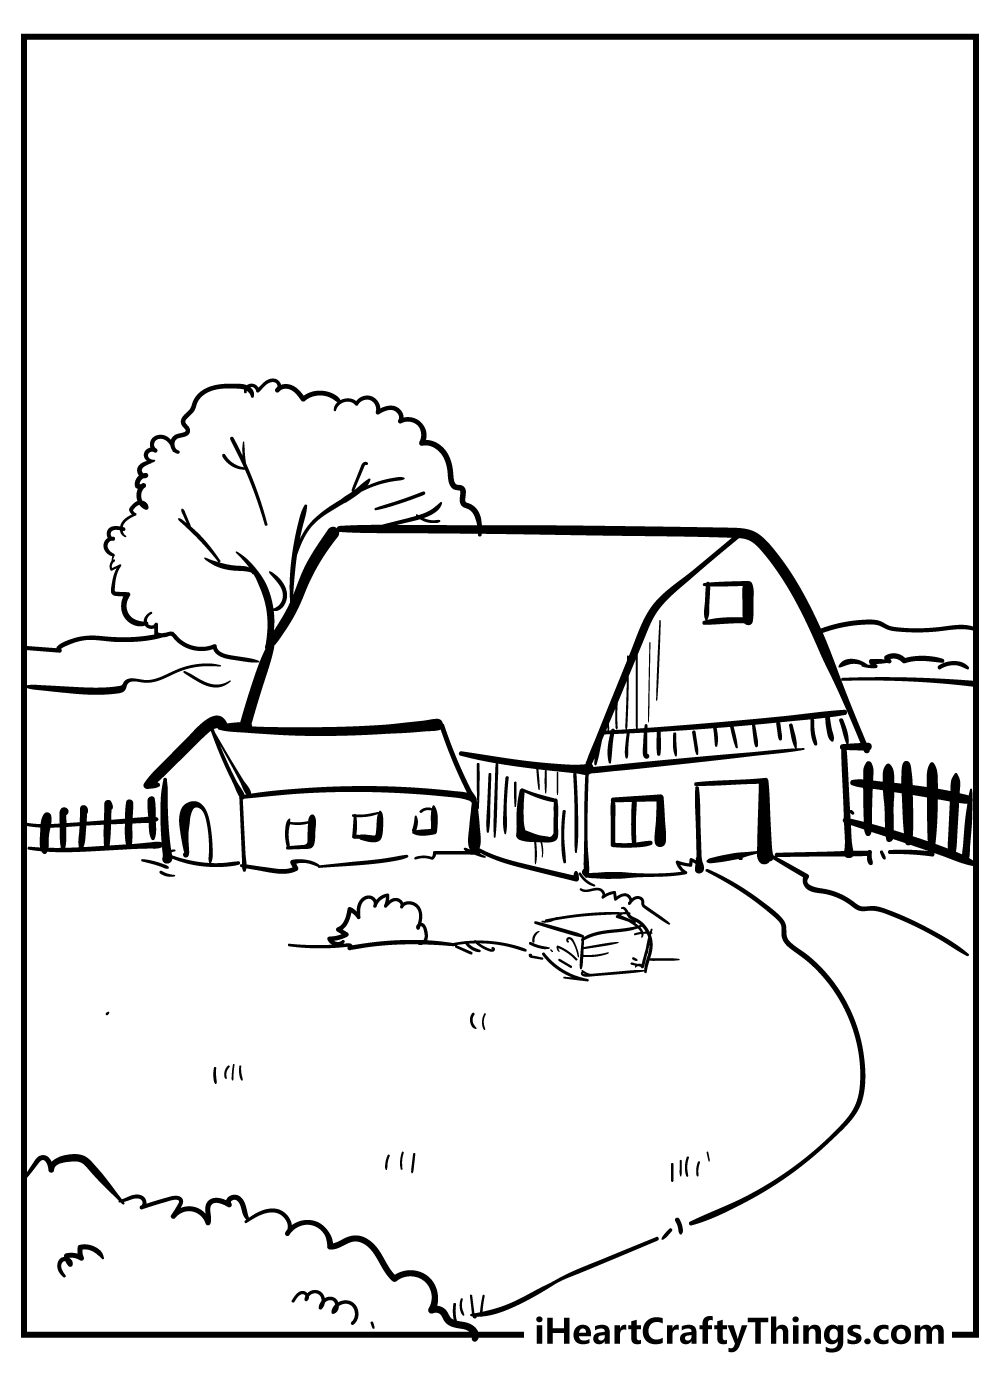 Barn Coloring Pages free pdf download